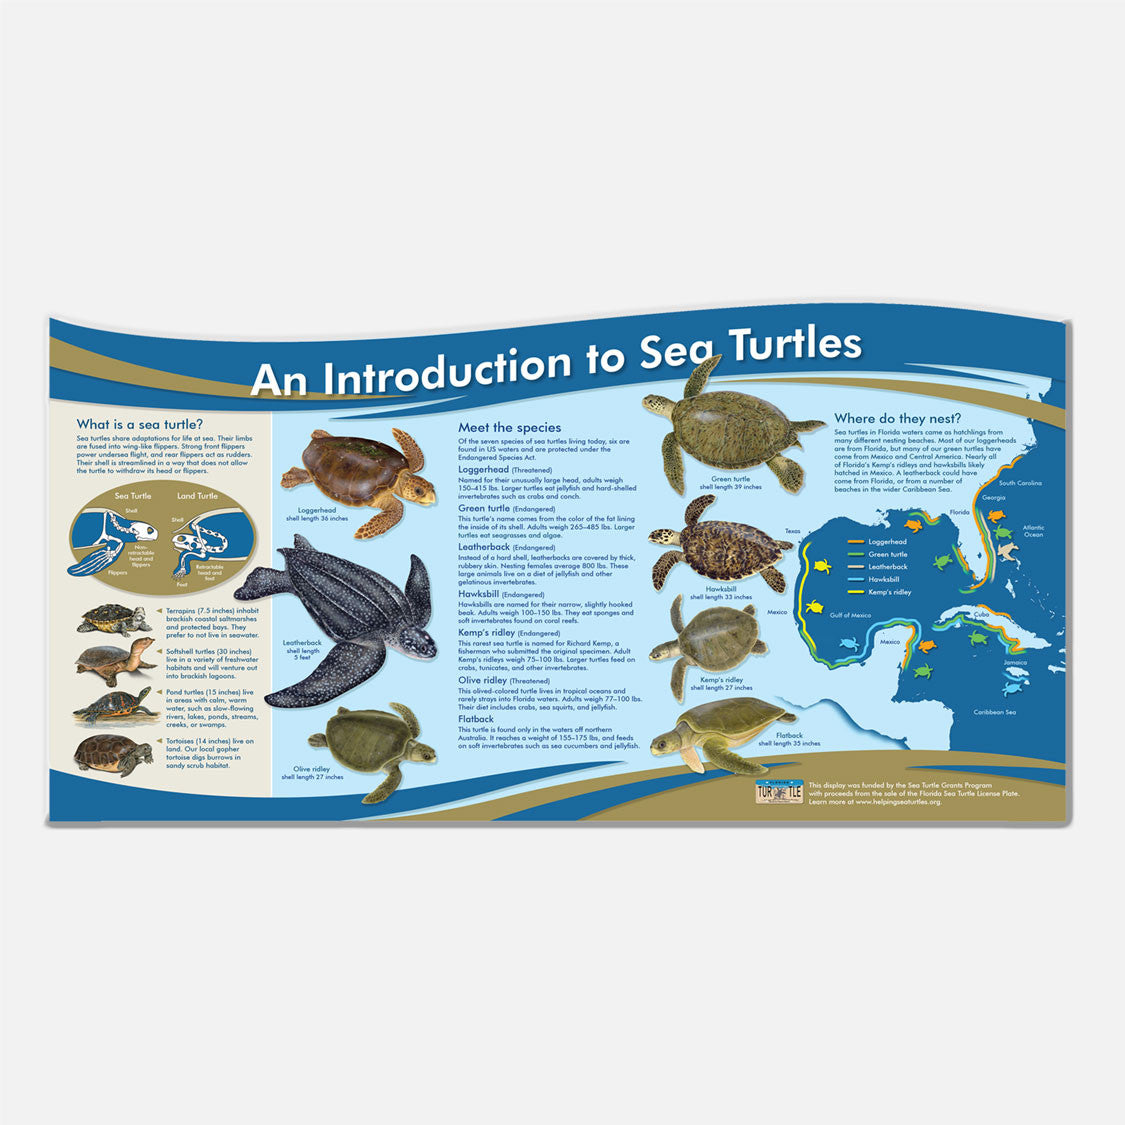 The sea turtle illustrations in this educational display are photo realistic and accurate in detail.